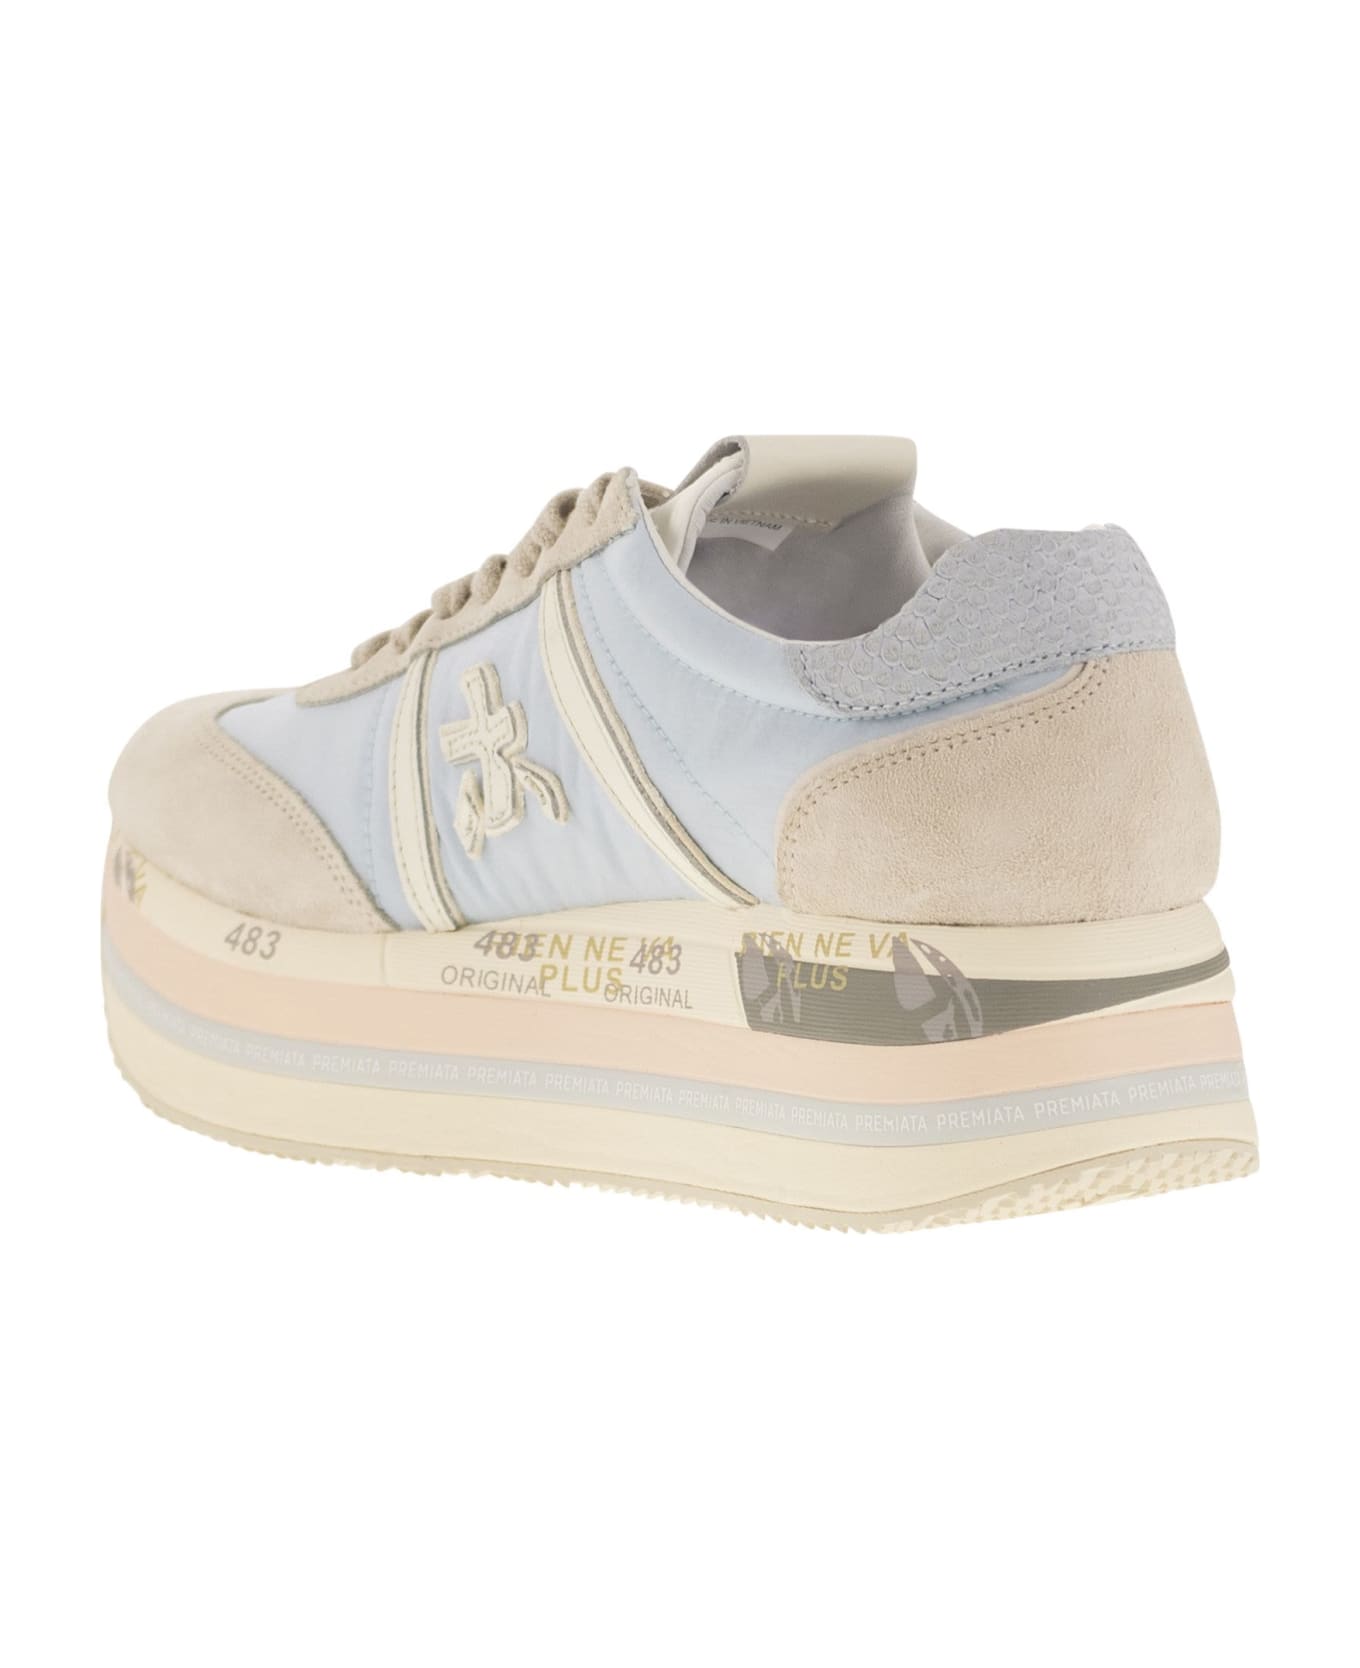 Premiata Beth Sneakers In Beige Suede And Fabric - White/light Blue スニーカー